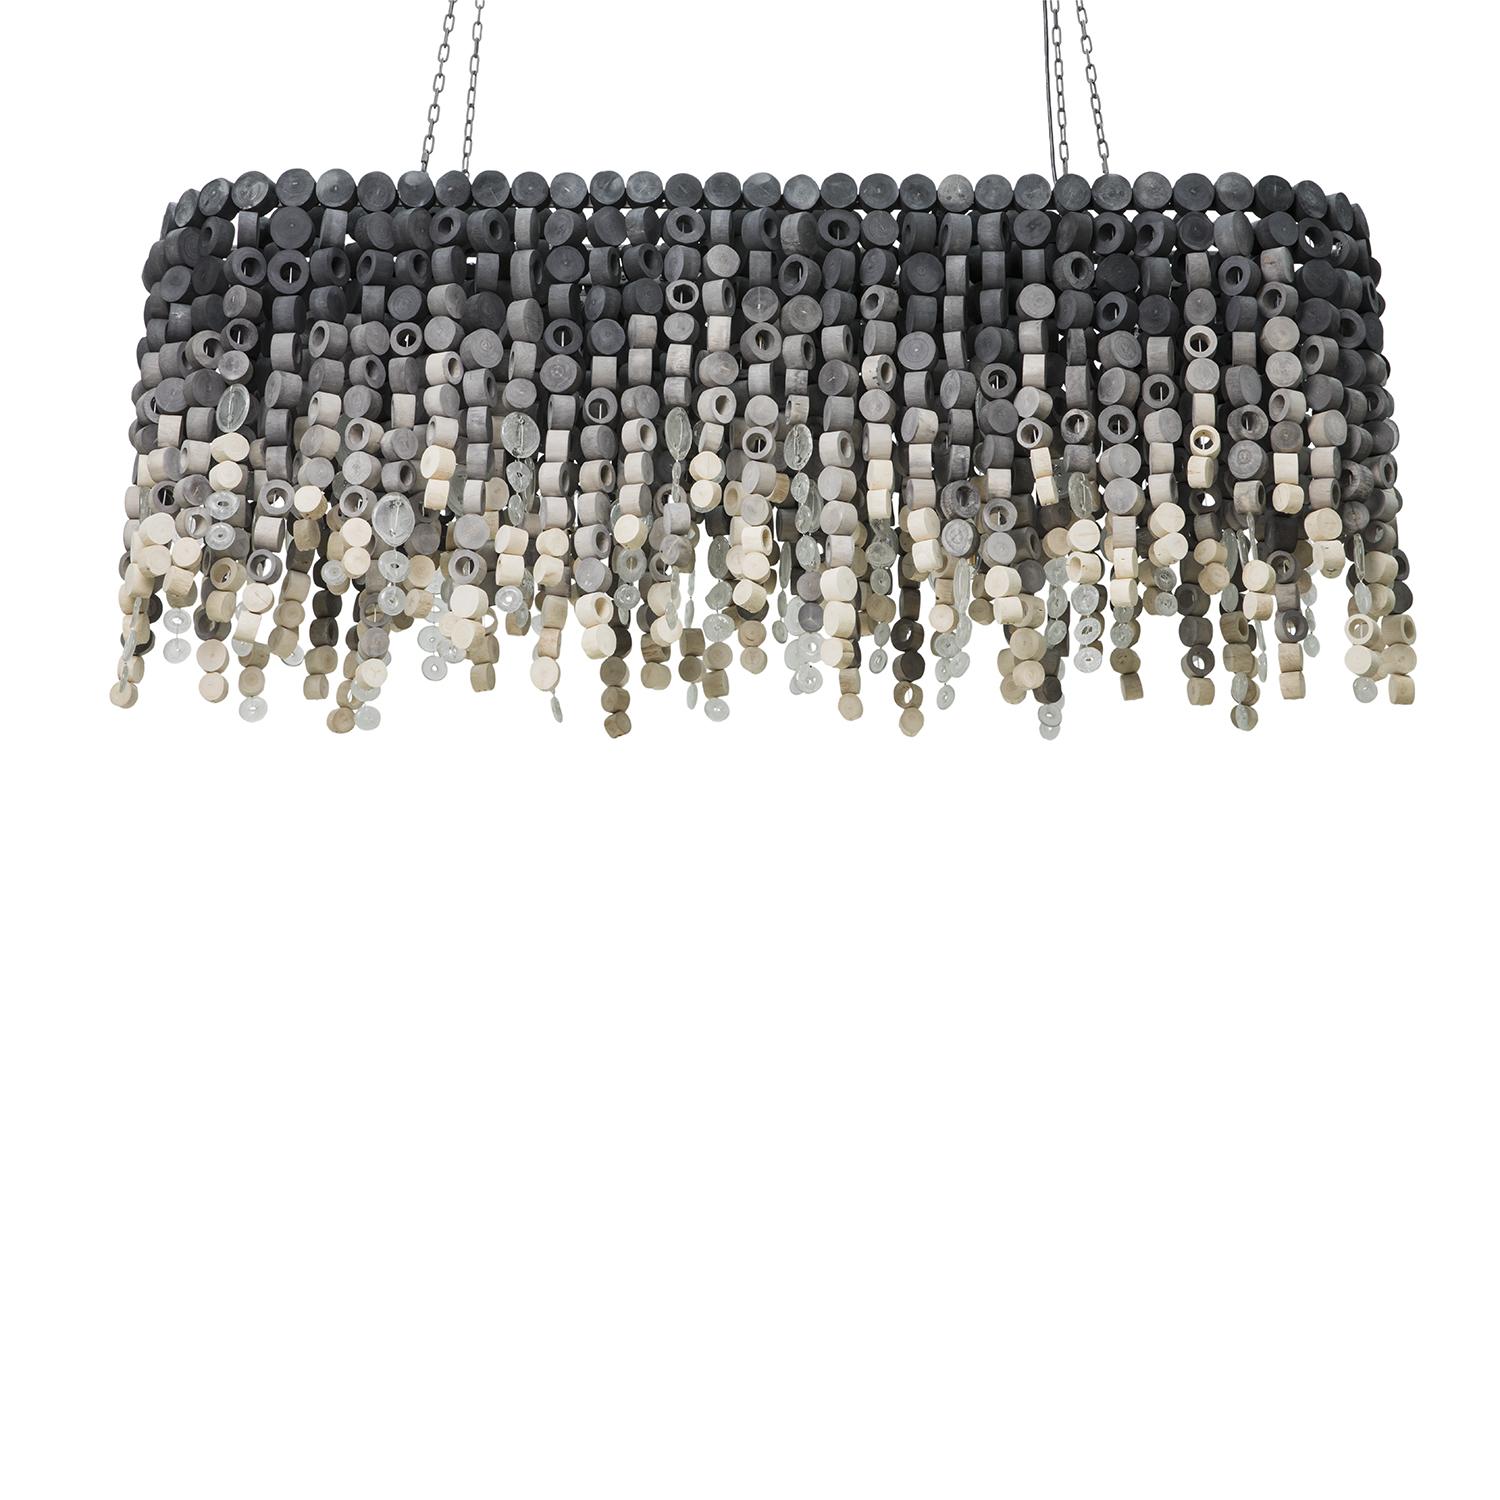 Large Oval Wood Disc Chandelier in Ombre Finish with Recycled Glass